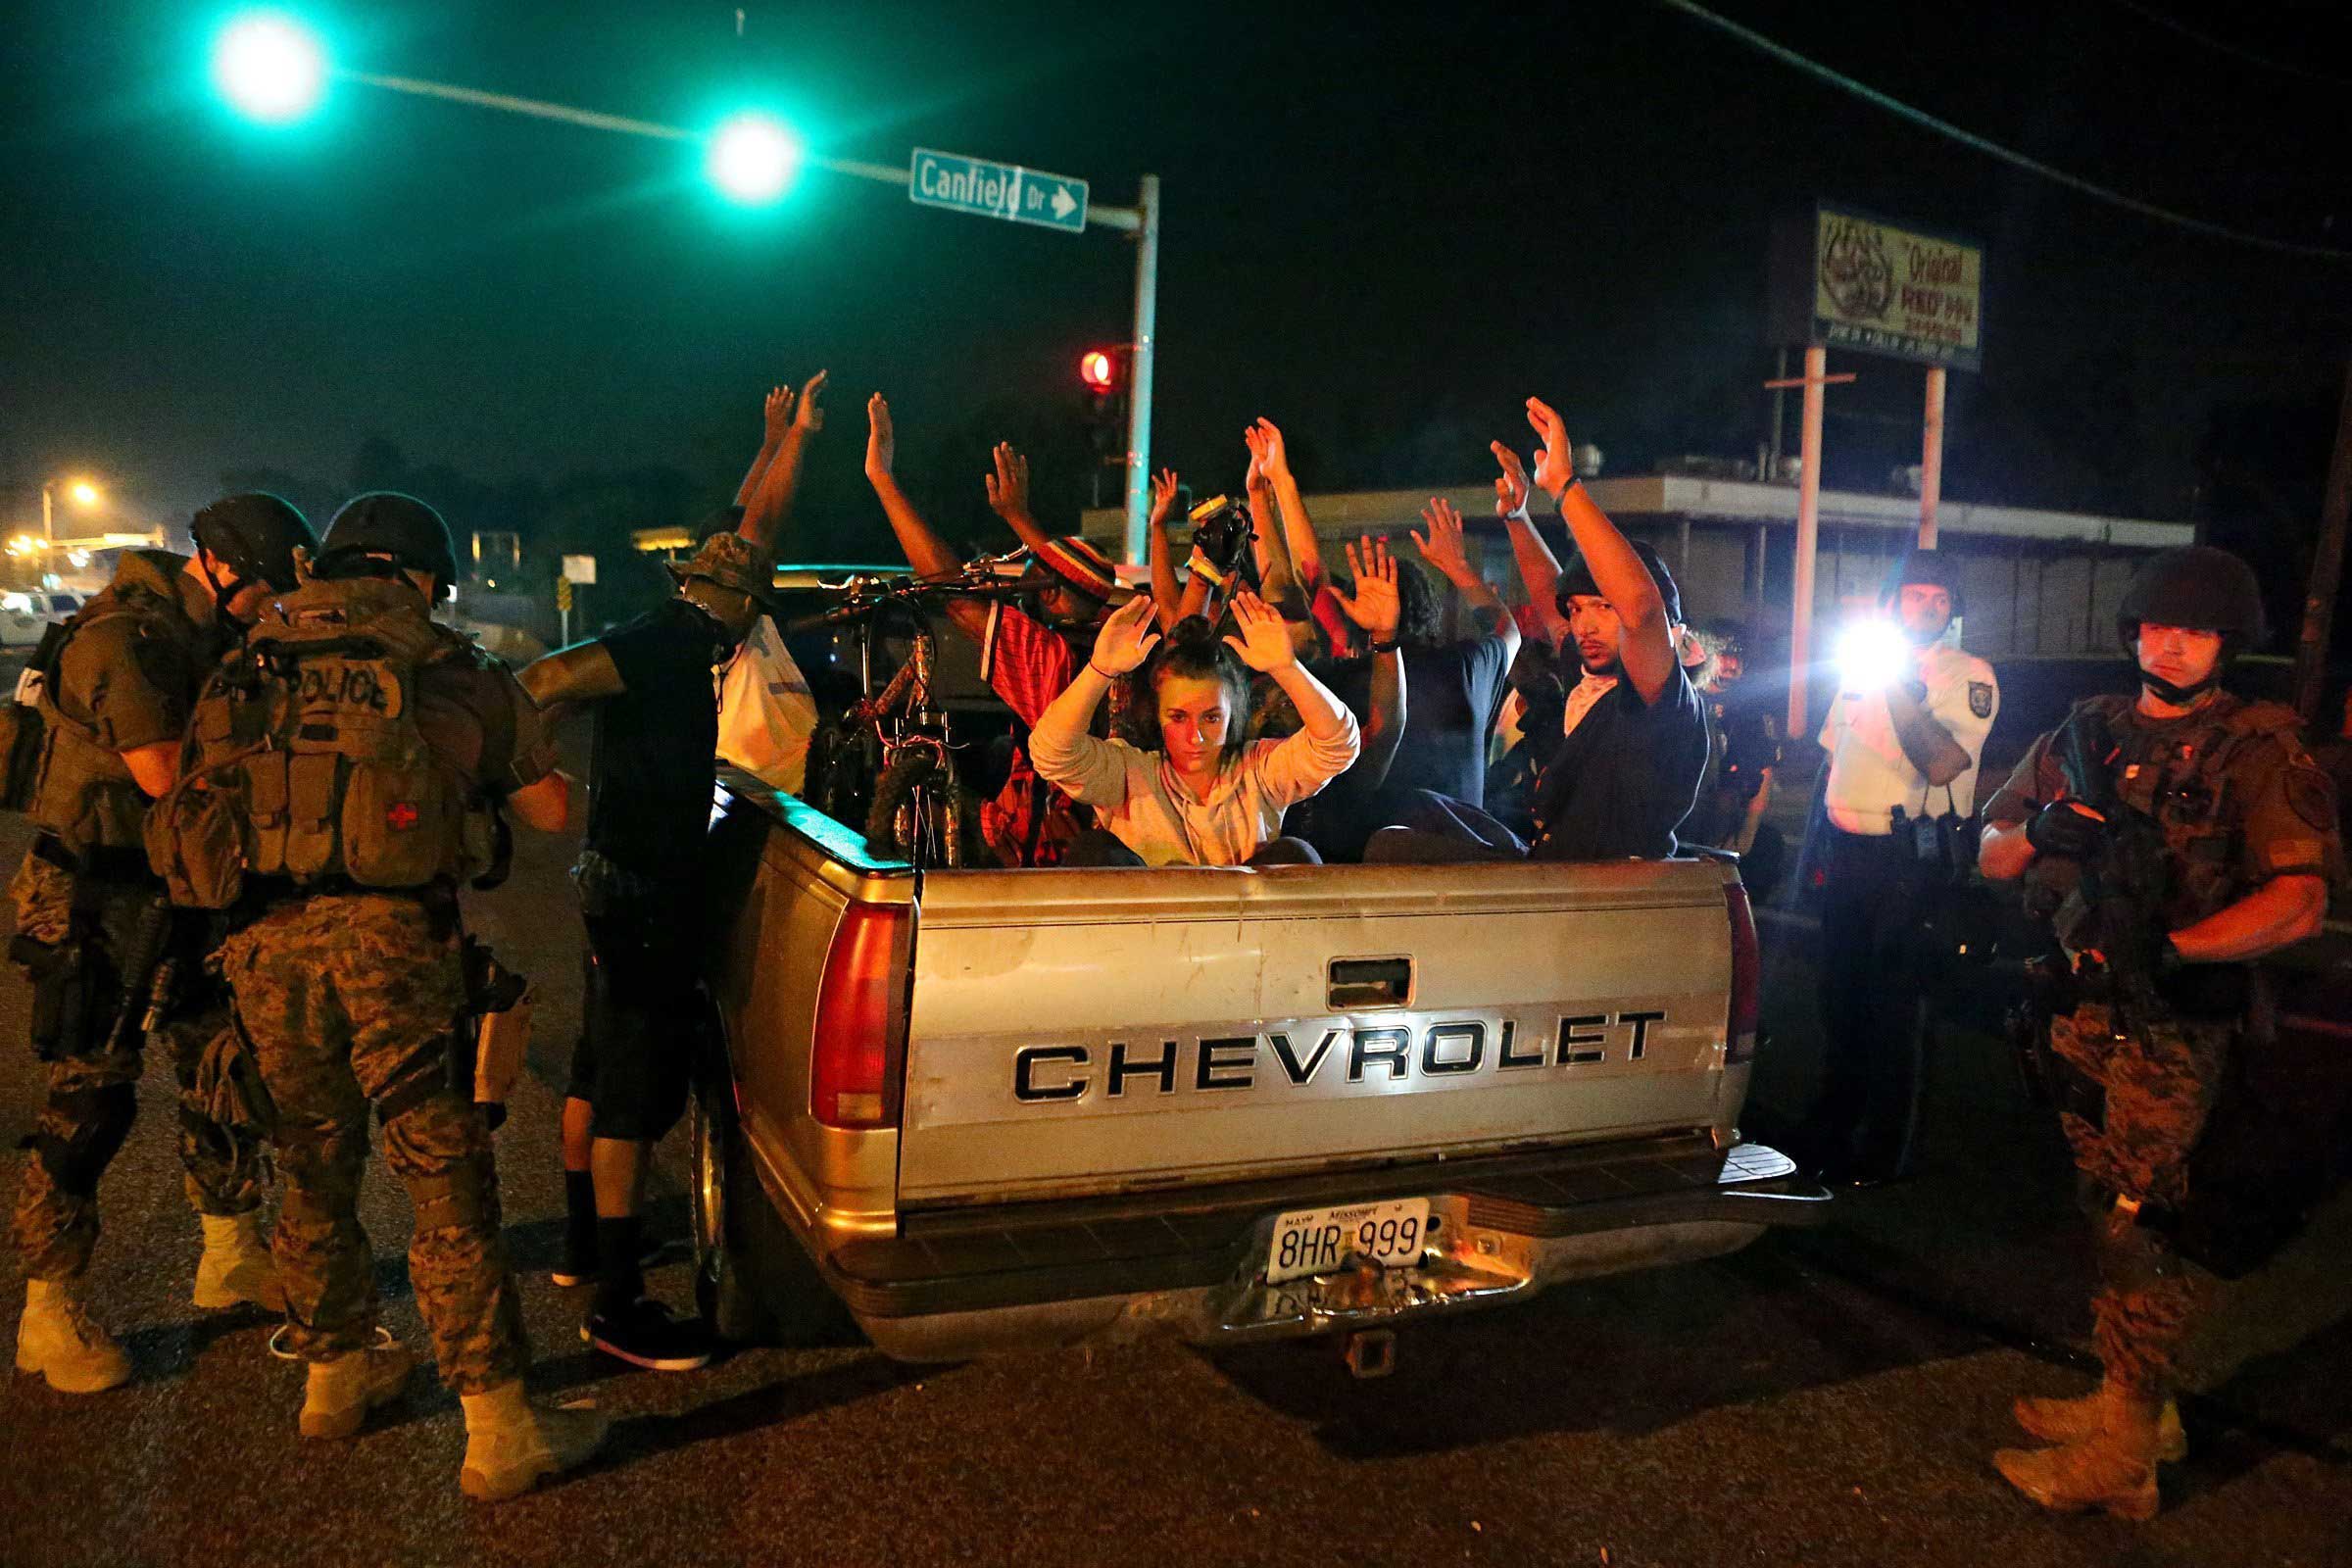 Aug. 19, 2014. Members of the St. Louis County Police tactical team take a truck load of 12 people into custody after they stopped it driving along W. Florissant Road near Canfield Drive. The police found two loaded guns on the people in the truck and removed an unused Molotov cocktail from the truck. Protests and clashes erupted between police and protesters in a Missouri city where racial tensions have boiled over since Ferguson police officer Darren Wilson fatally shot unarmed Black teen Michael Brown on Aug. 9.